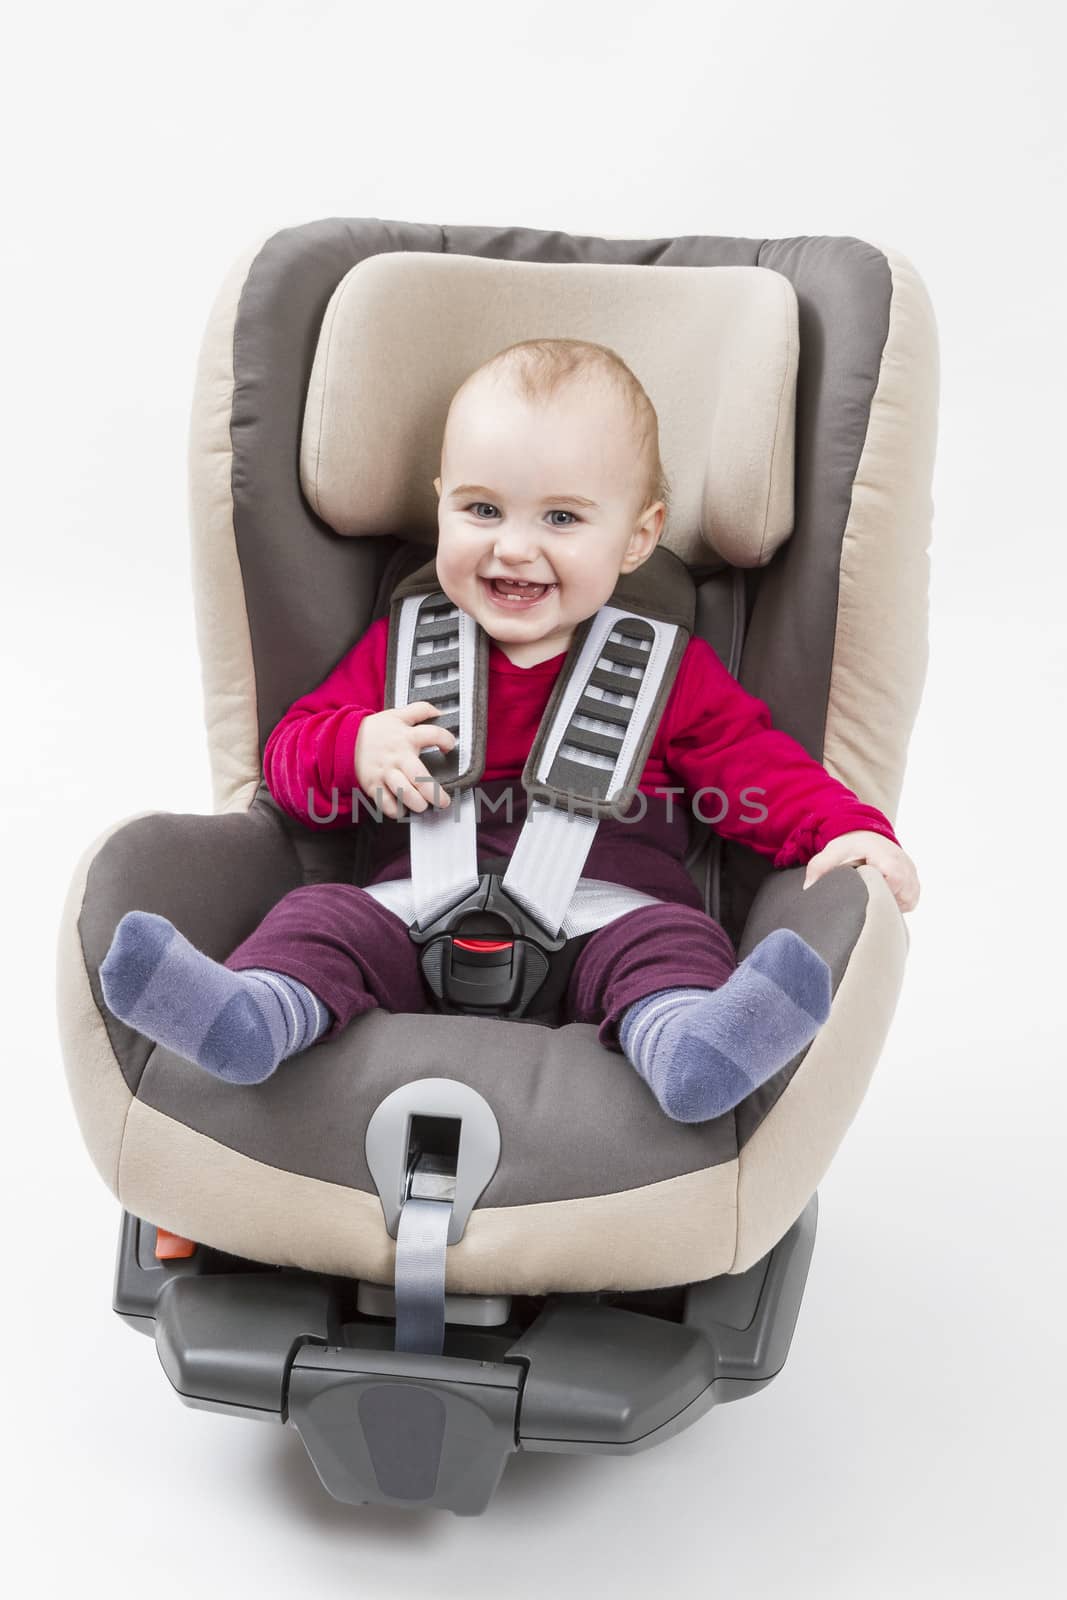 laughing child in booster seat for a car in light background.